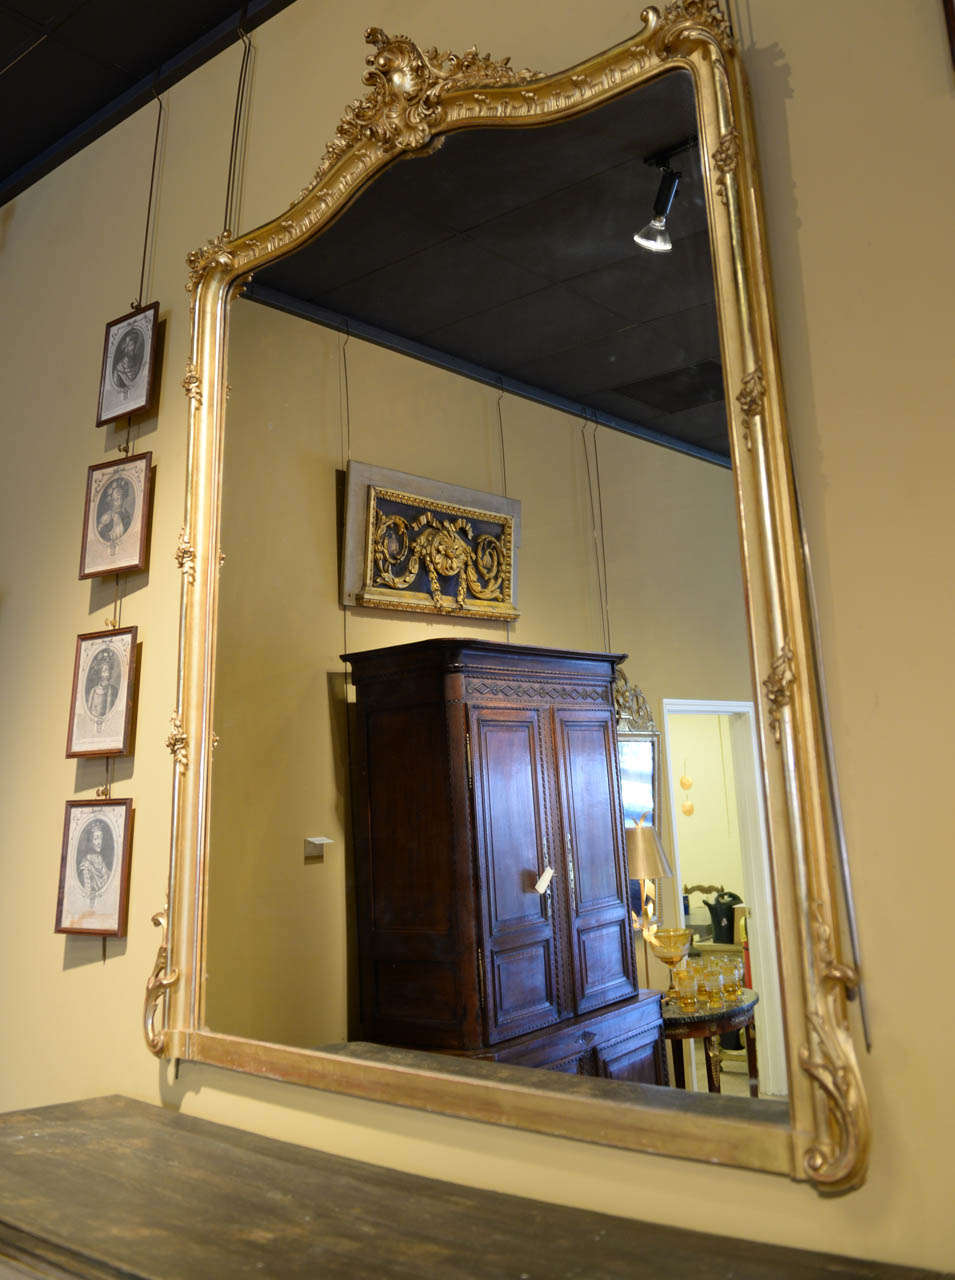 Quite a large mirror that makes an elegant statement.  The delicate fluid lines, in Louis XVth style, along with beautiful roses and leaves adorn the frame.